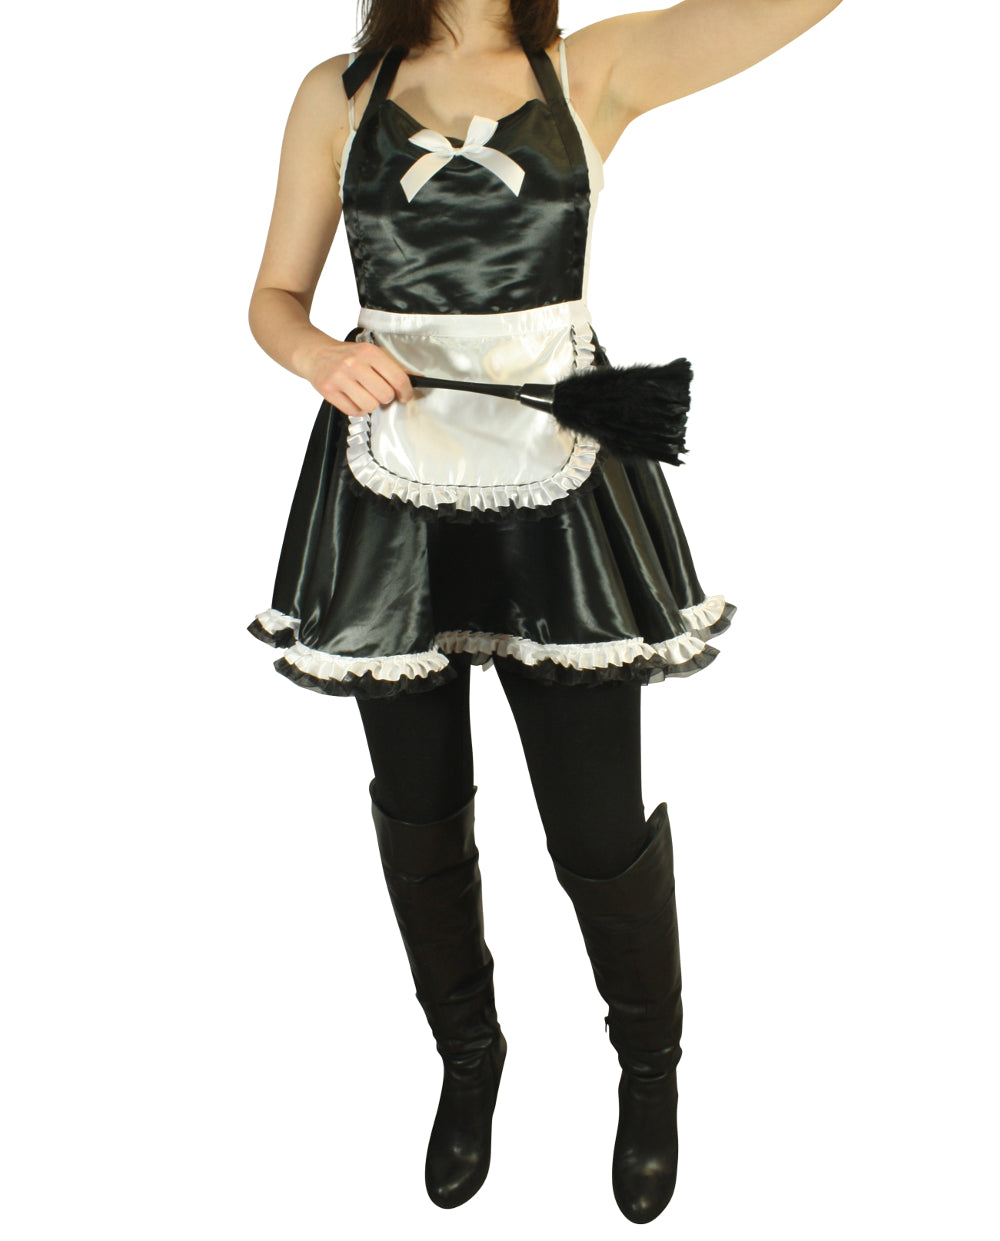 Maid outfit with feather duster